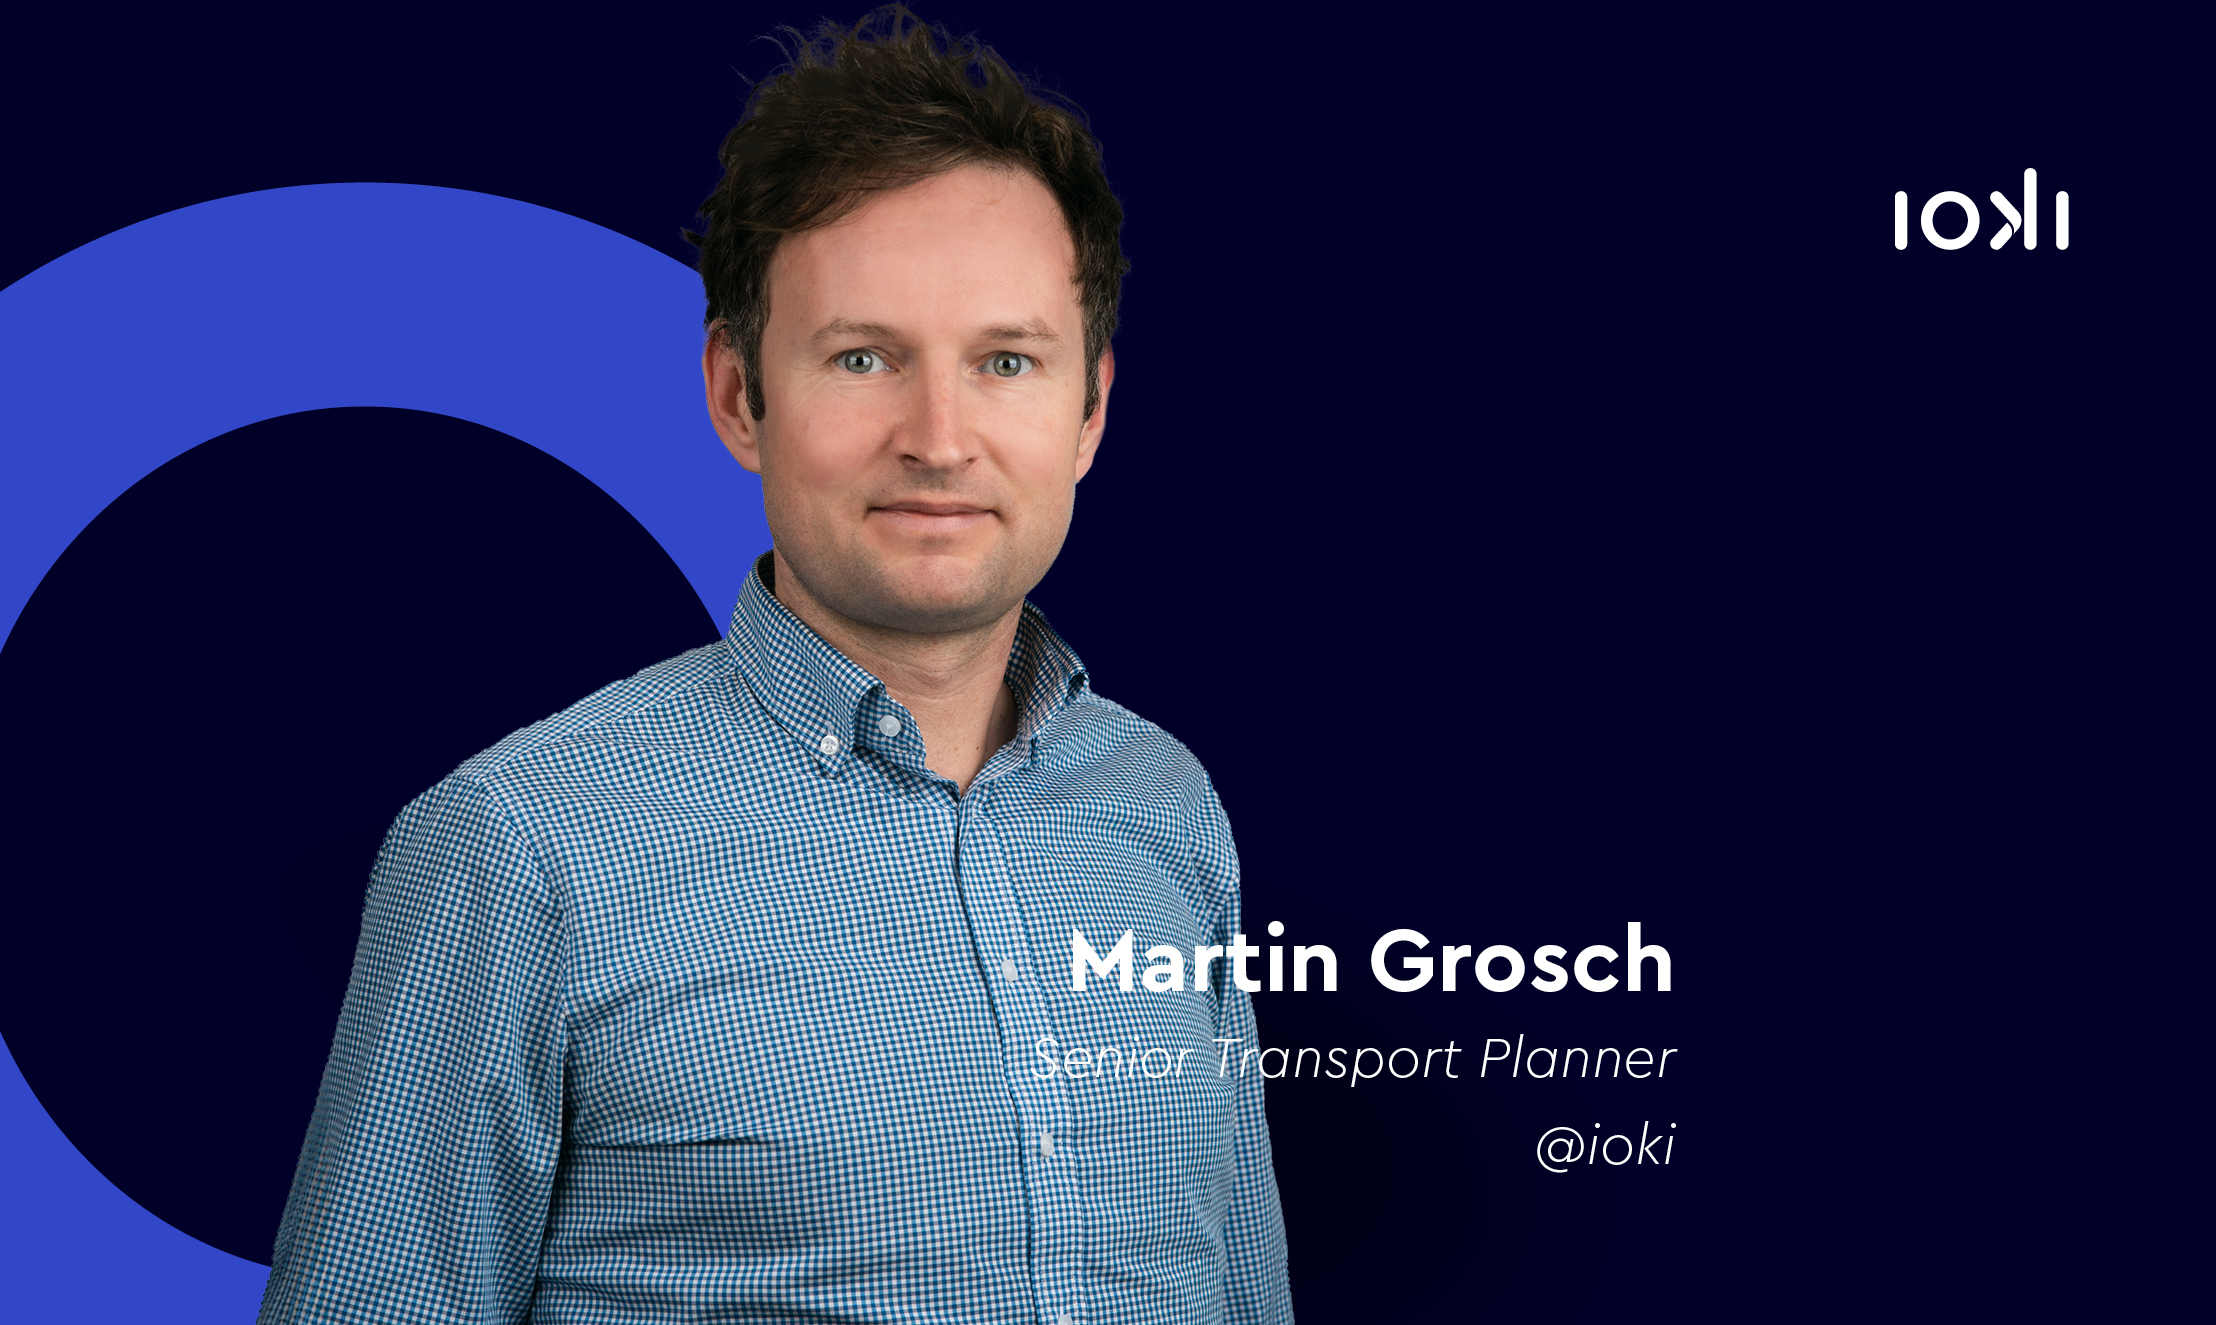 Perspectives from Martin Grosch